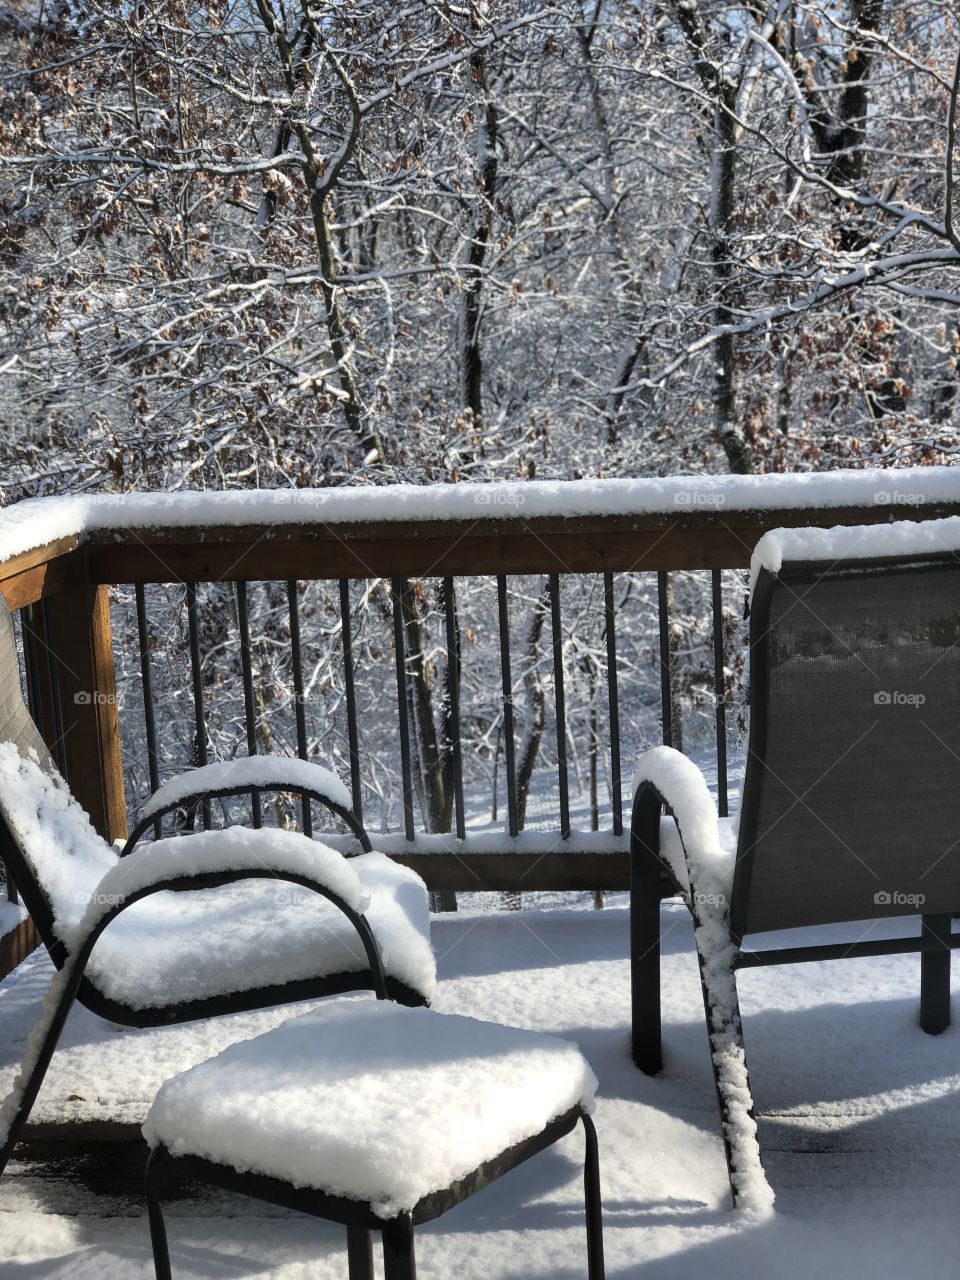 Snow from the deck